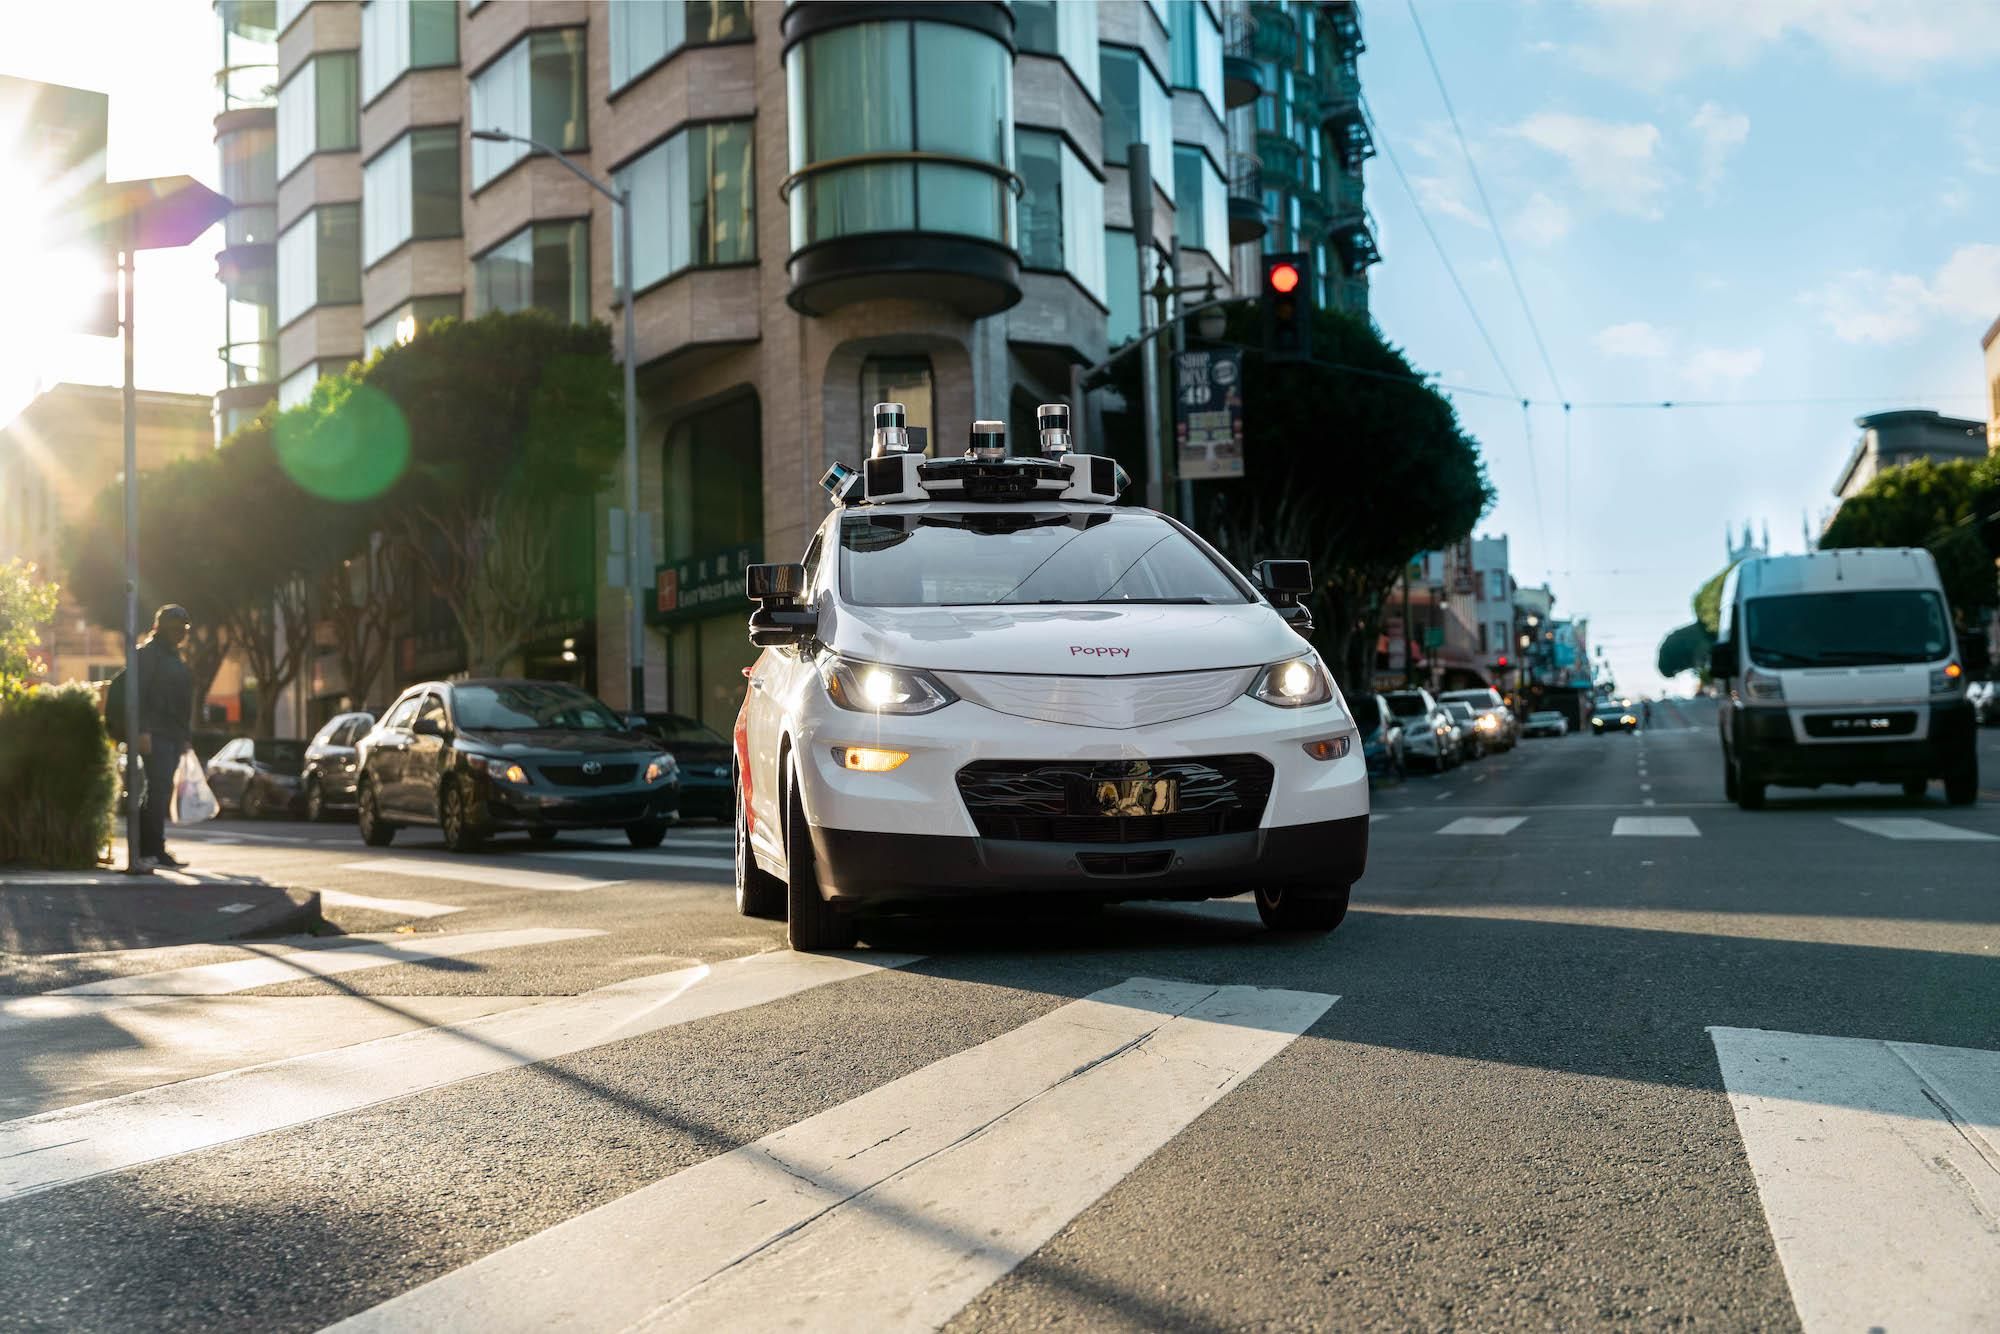 Meet Poppy, SF's first all-electric, self-driving car